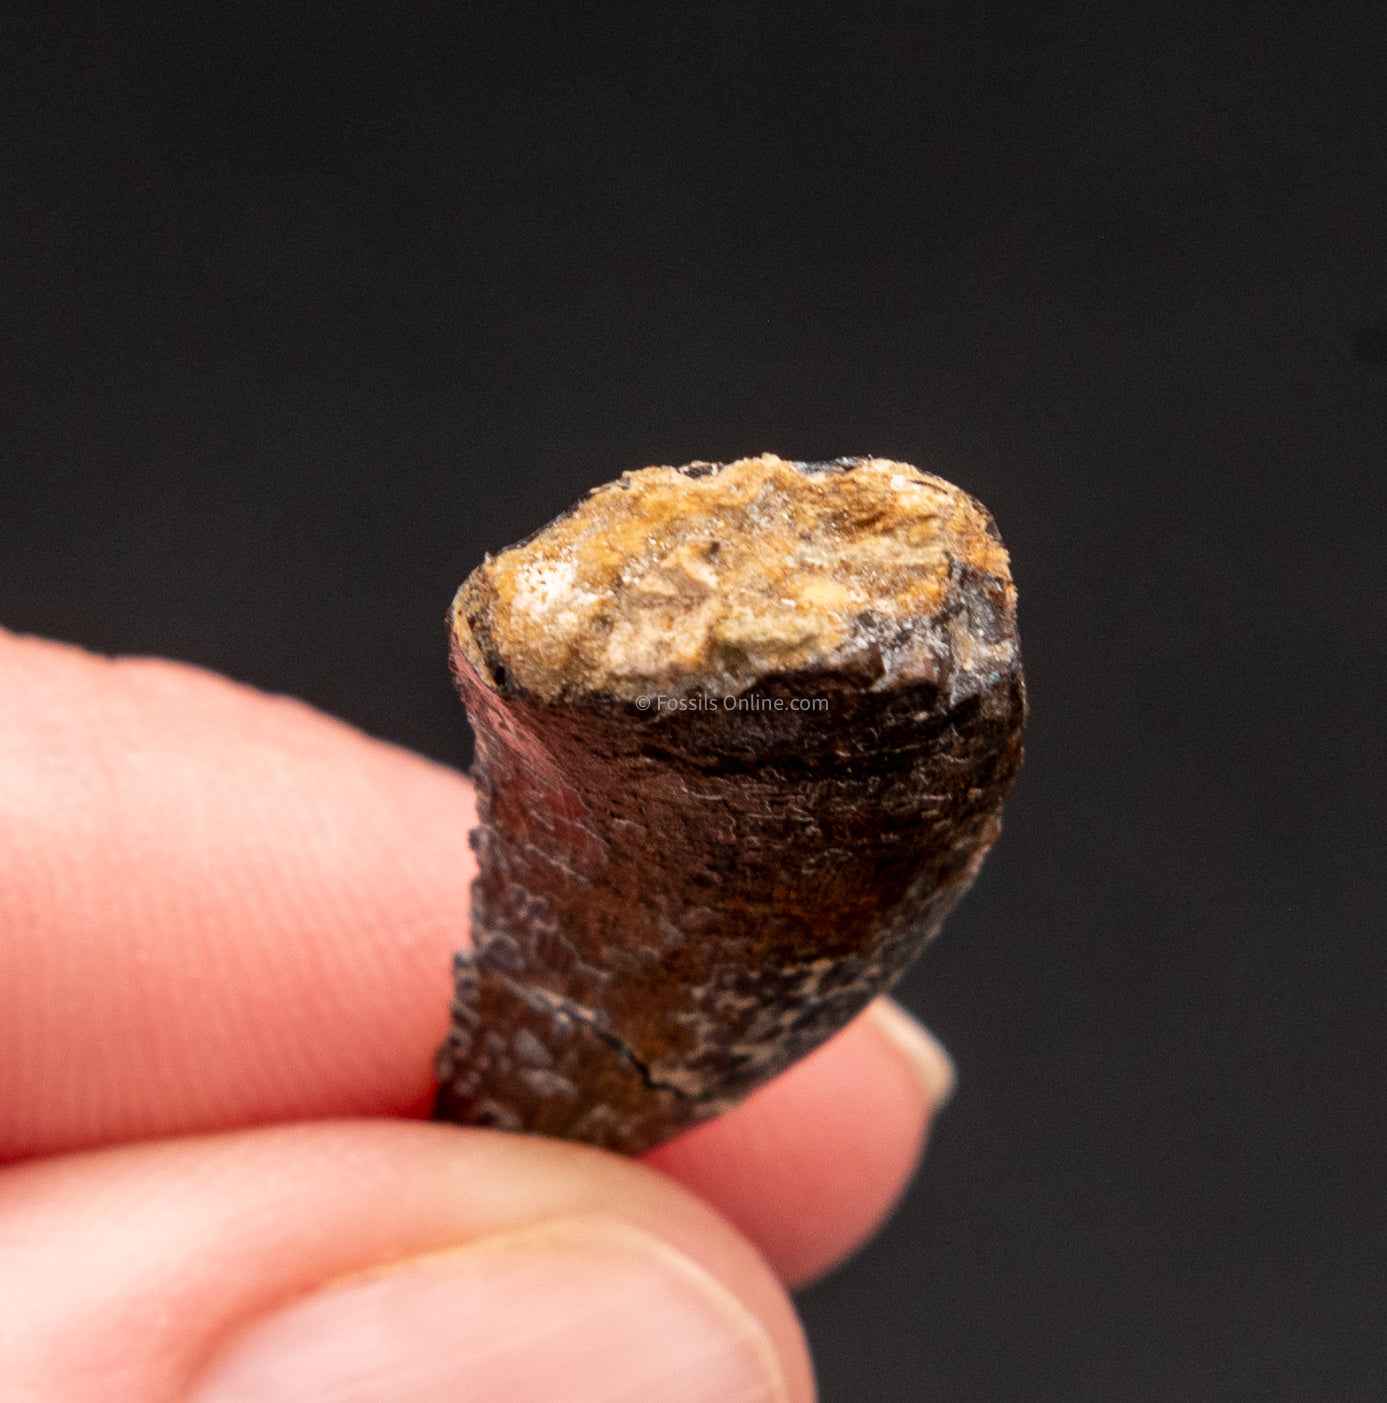 Root of an allosaurus tooth